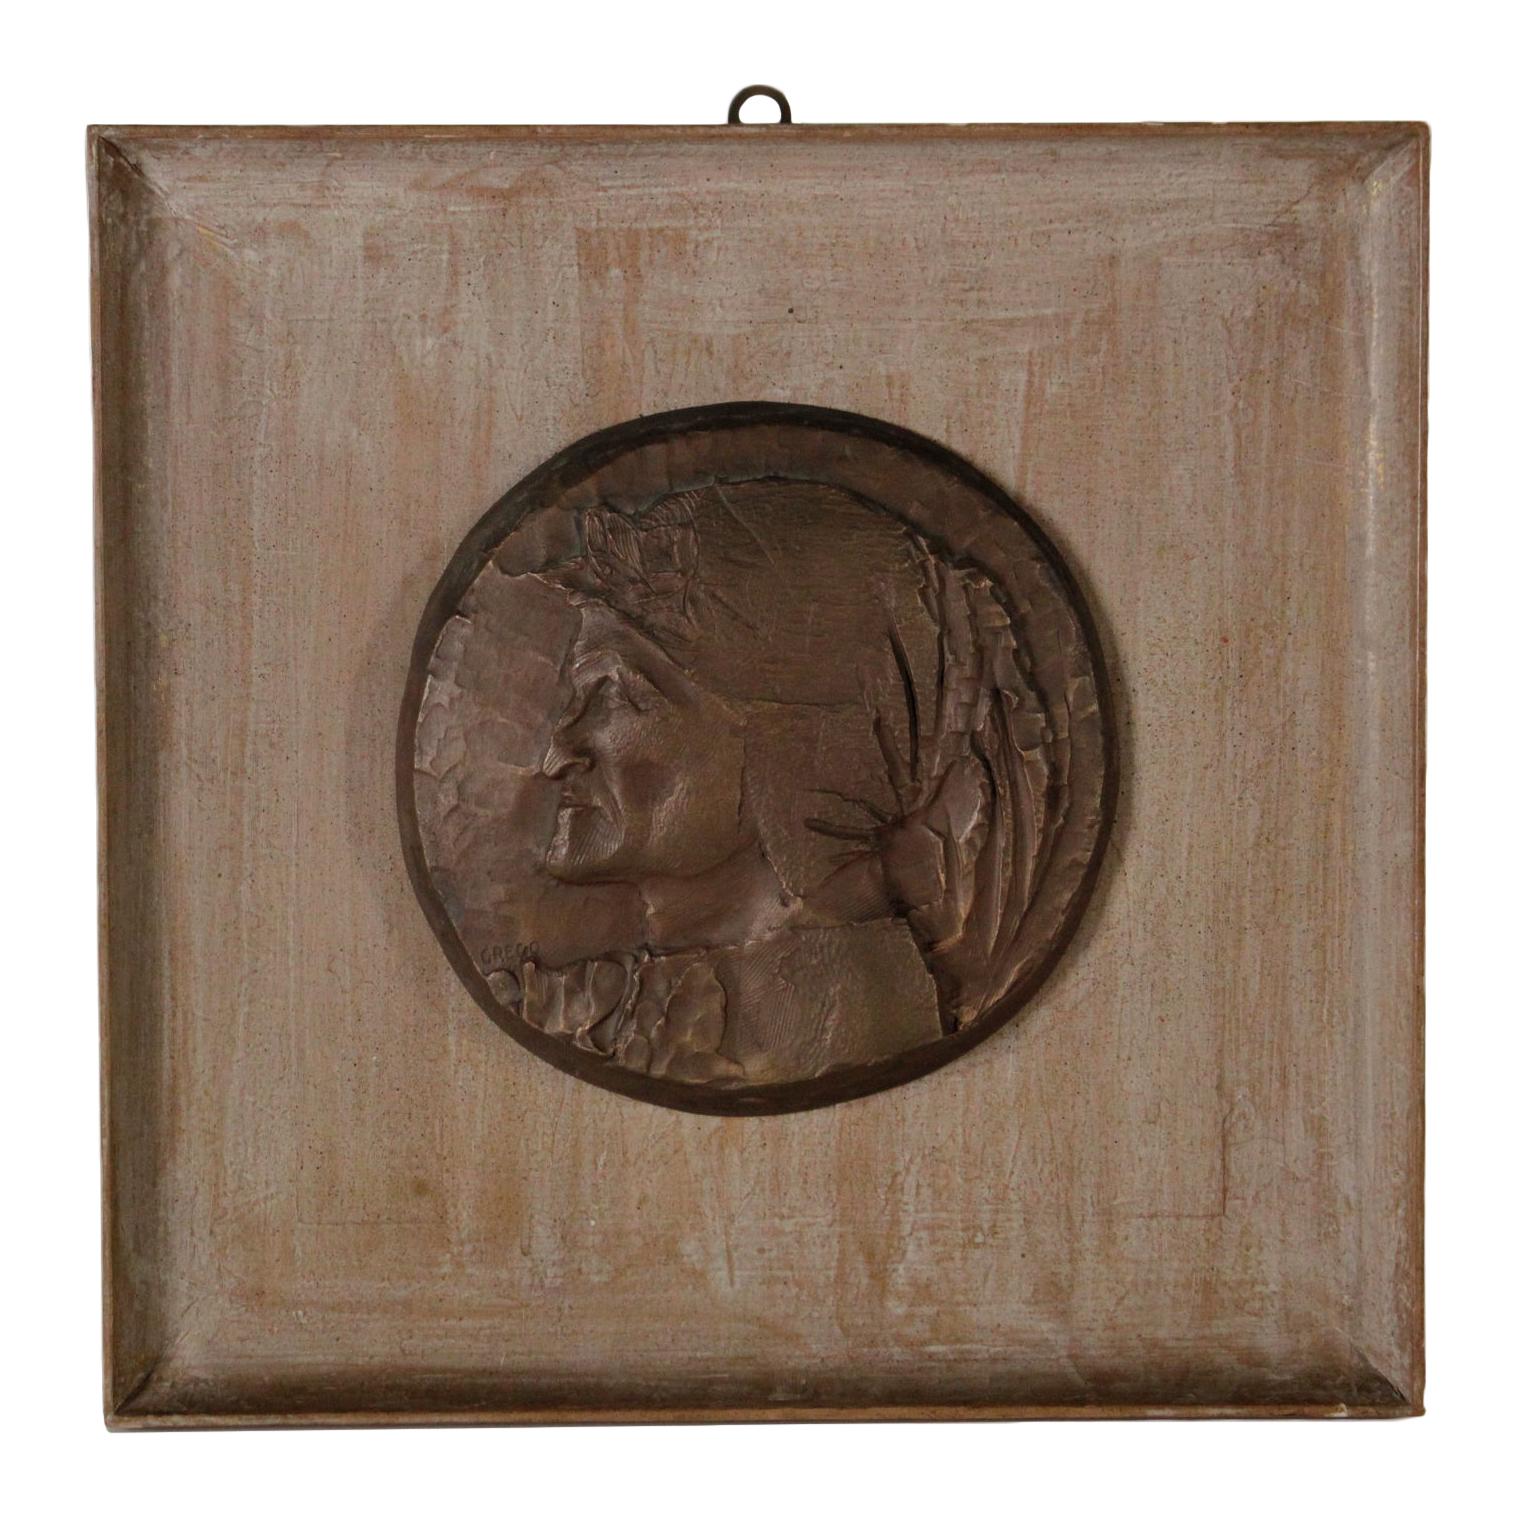 A bronze bas-relief made by Emilio Greco (1913-1995) depicting Dante Alighieri. Signed in the lower left corner. Accompanied by a catalogue article beloging to the "Rassegna di scultura dantesca contemporanea" of Ravenna, 1975 as exempla work, out